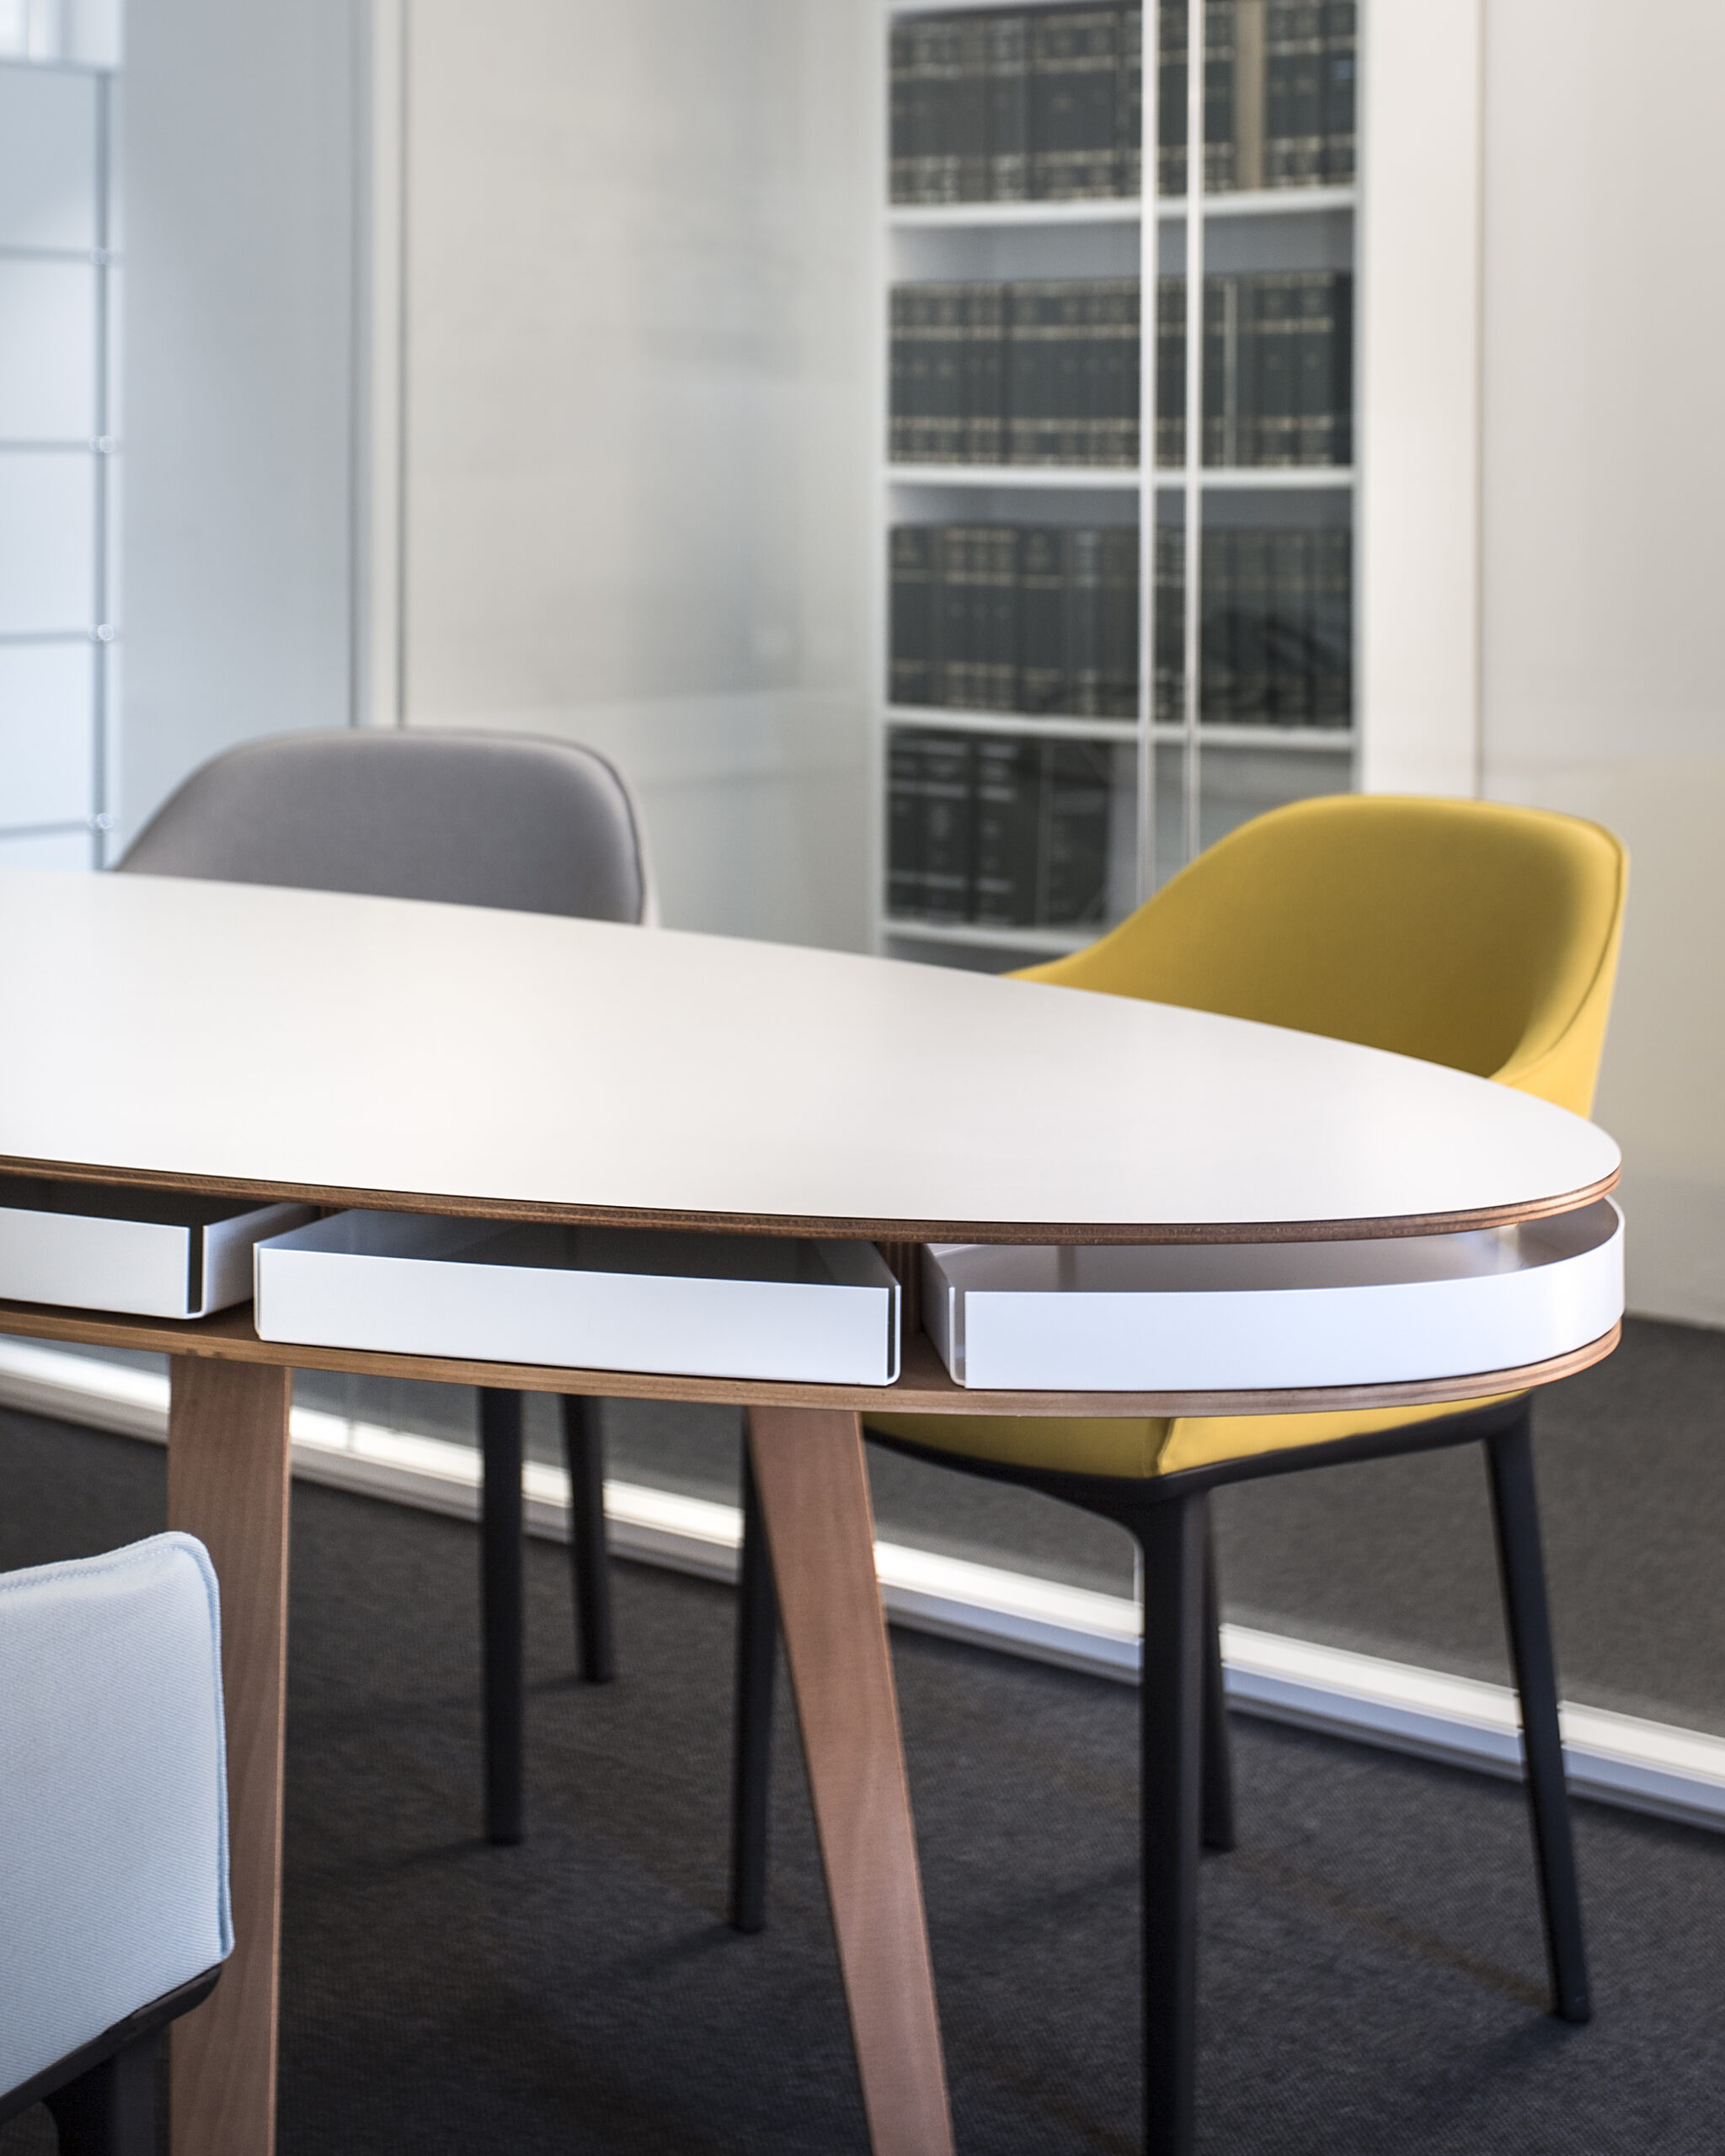 Lawyer's office-Geneva-Architecture-Design-Xpand tables